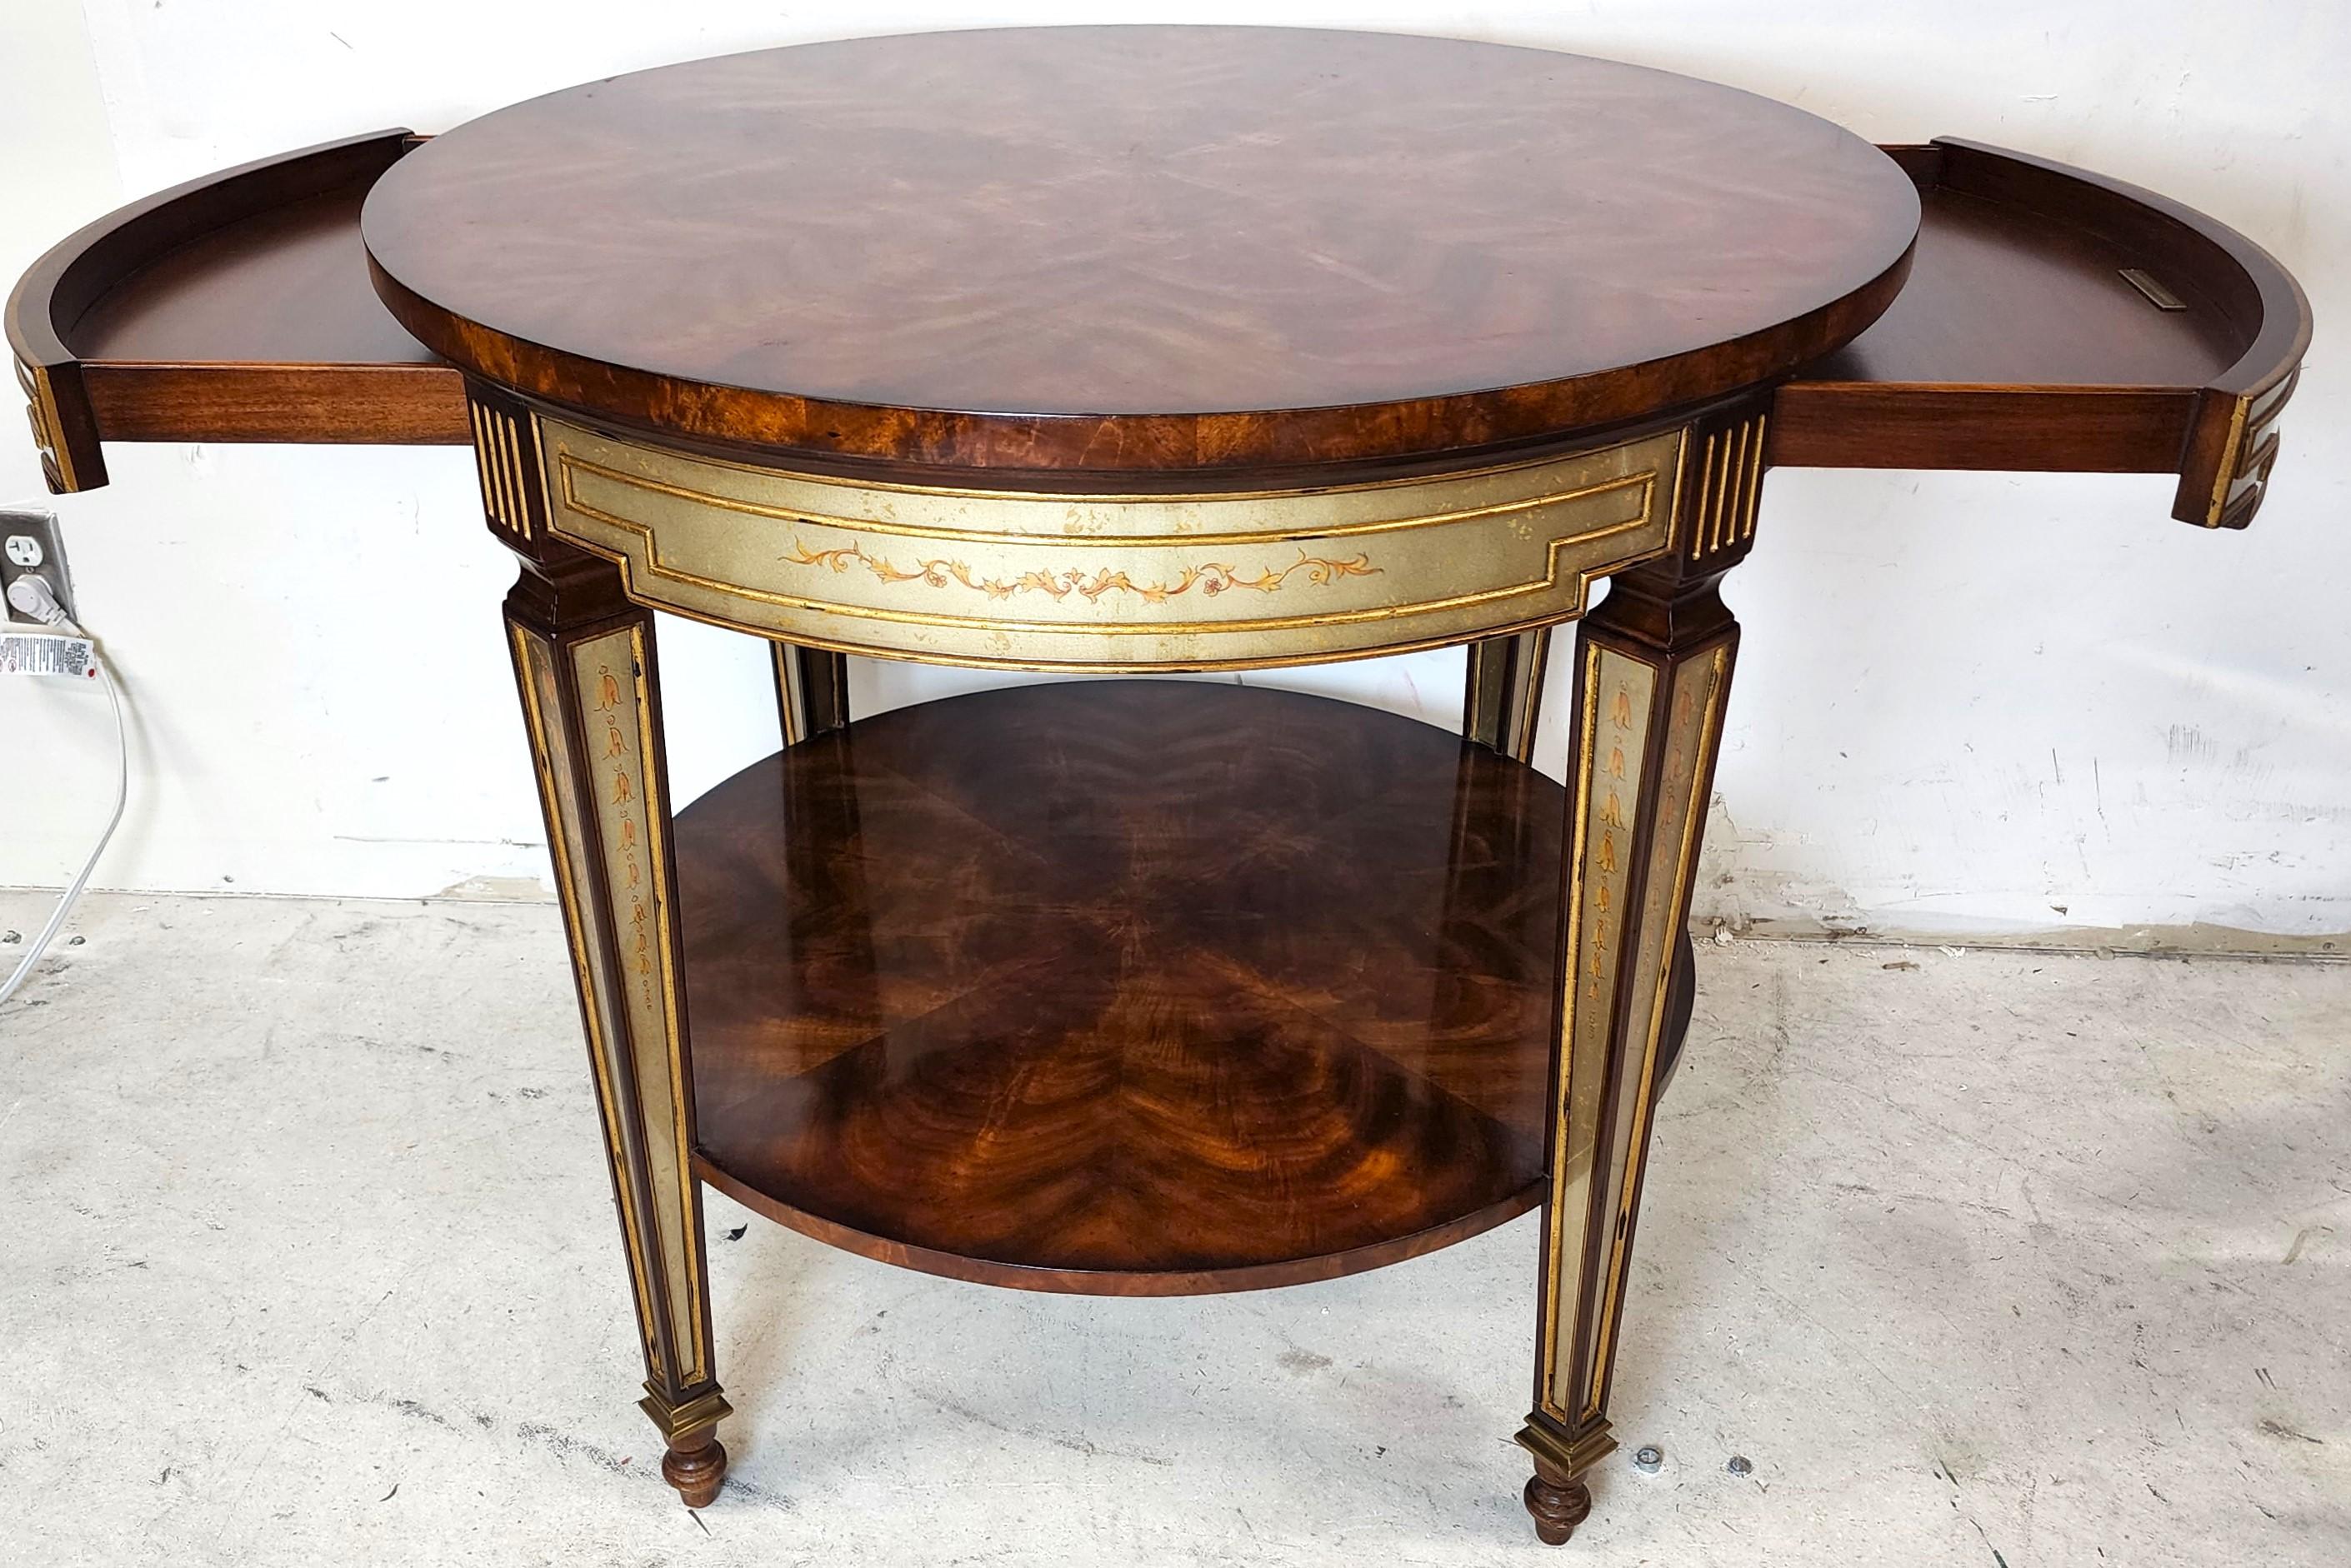 Offering one of our recent palm beach estate fine furniture acquisitions of a
Theodore Alexander regency 2-drawer Eglomise Mirrored occasional side table.
Featuring 2 drawers on either side and flame mahogany top and bottom surfaces.

Approximate